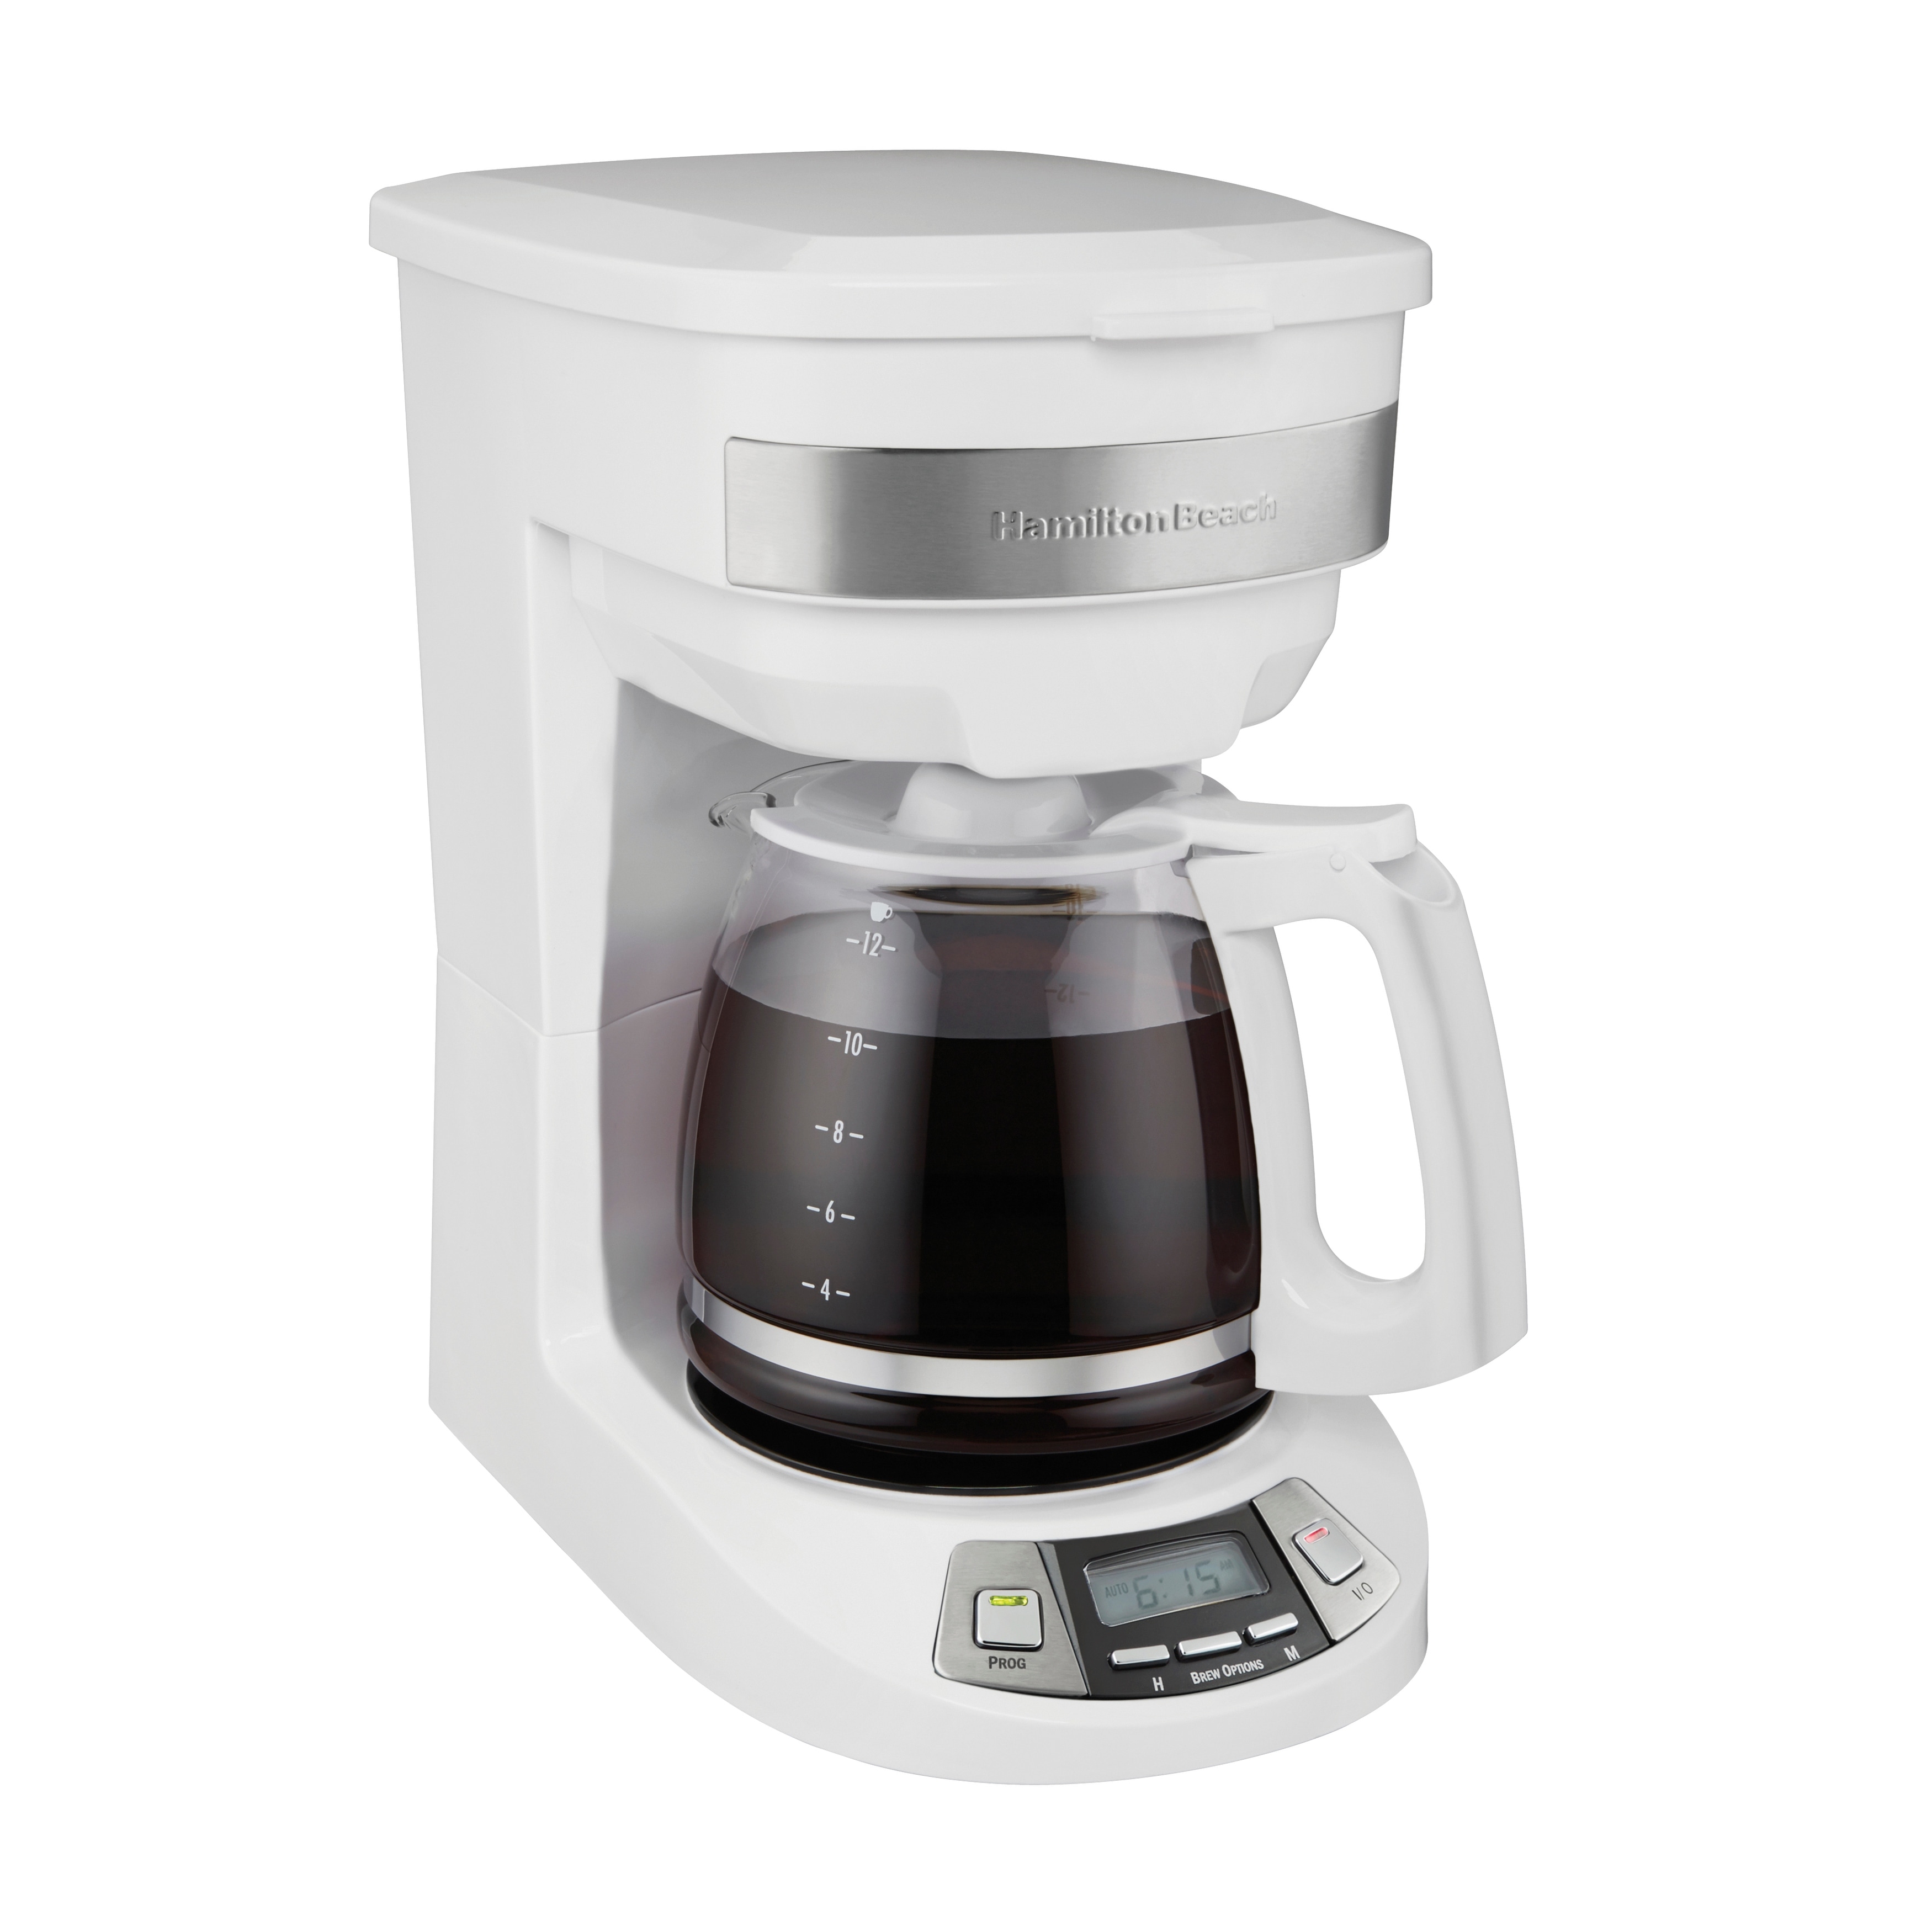 https://ak1.ostkcdn.com/images/products/is/images/direct/0afcf8957fddd3a82b6998fe766feeb82654015c/Programmable-Coffee-Maker.jpg